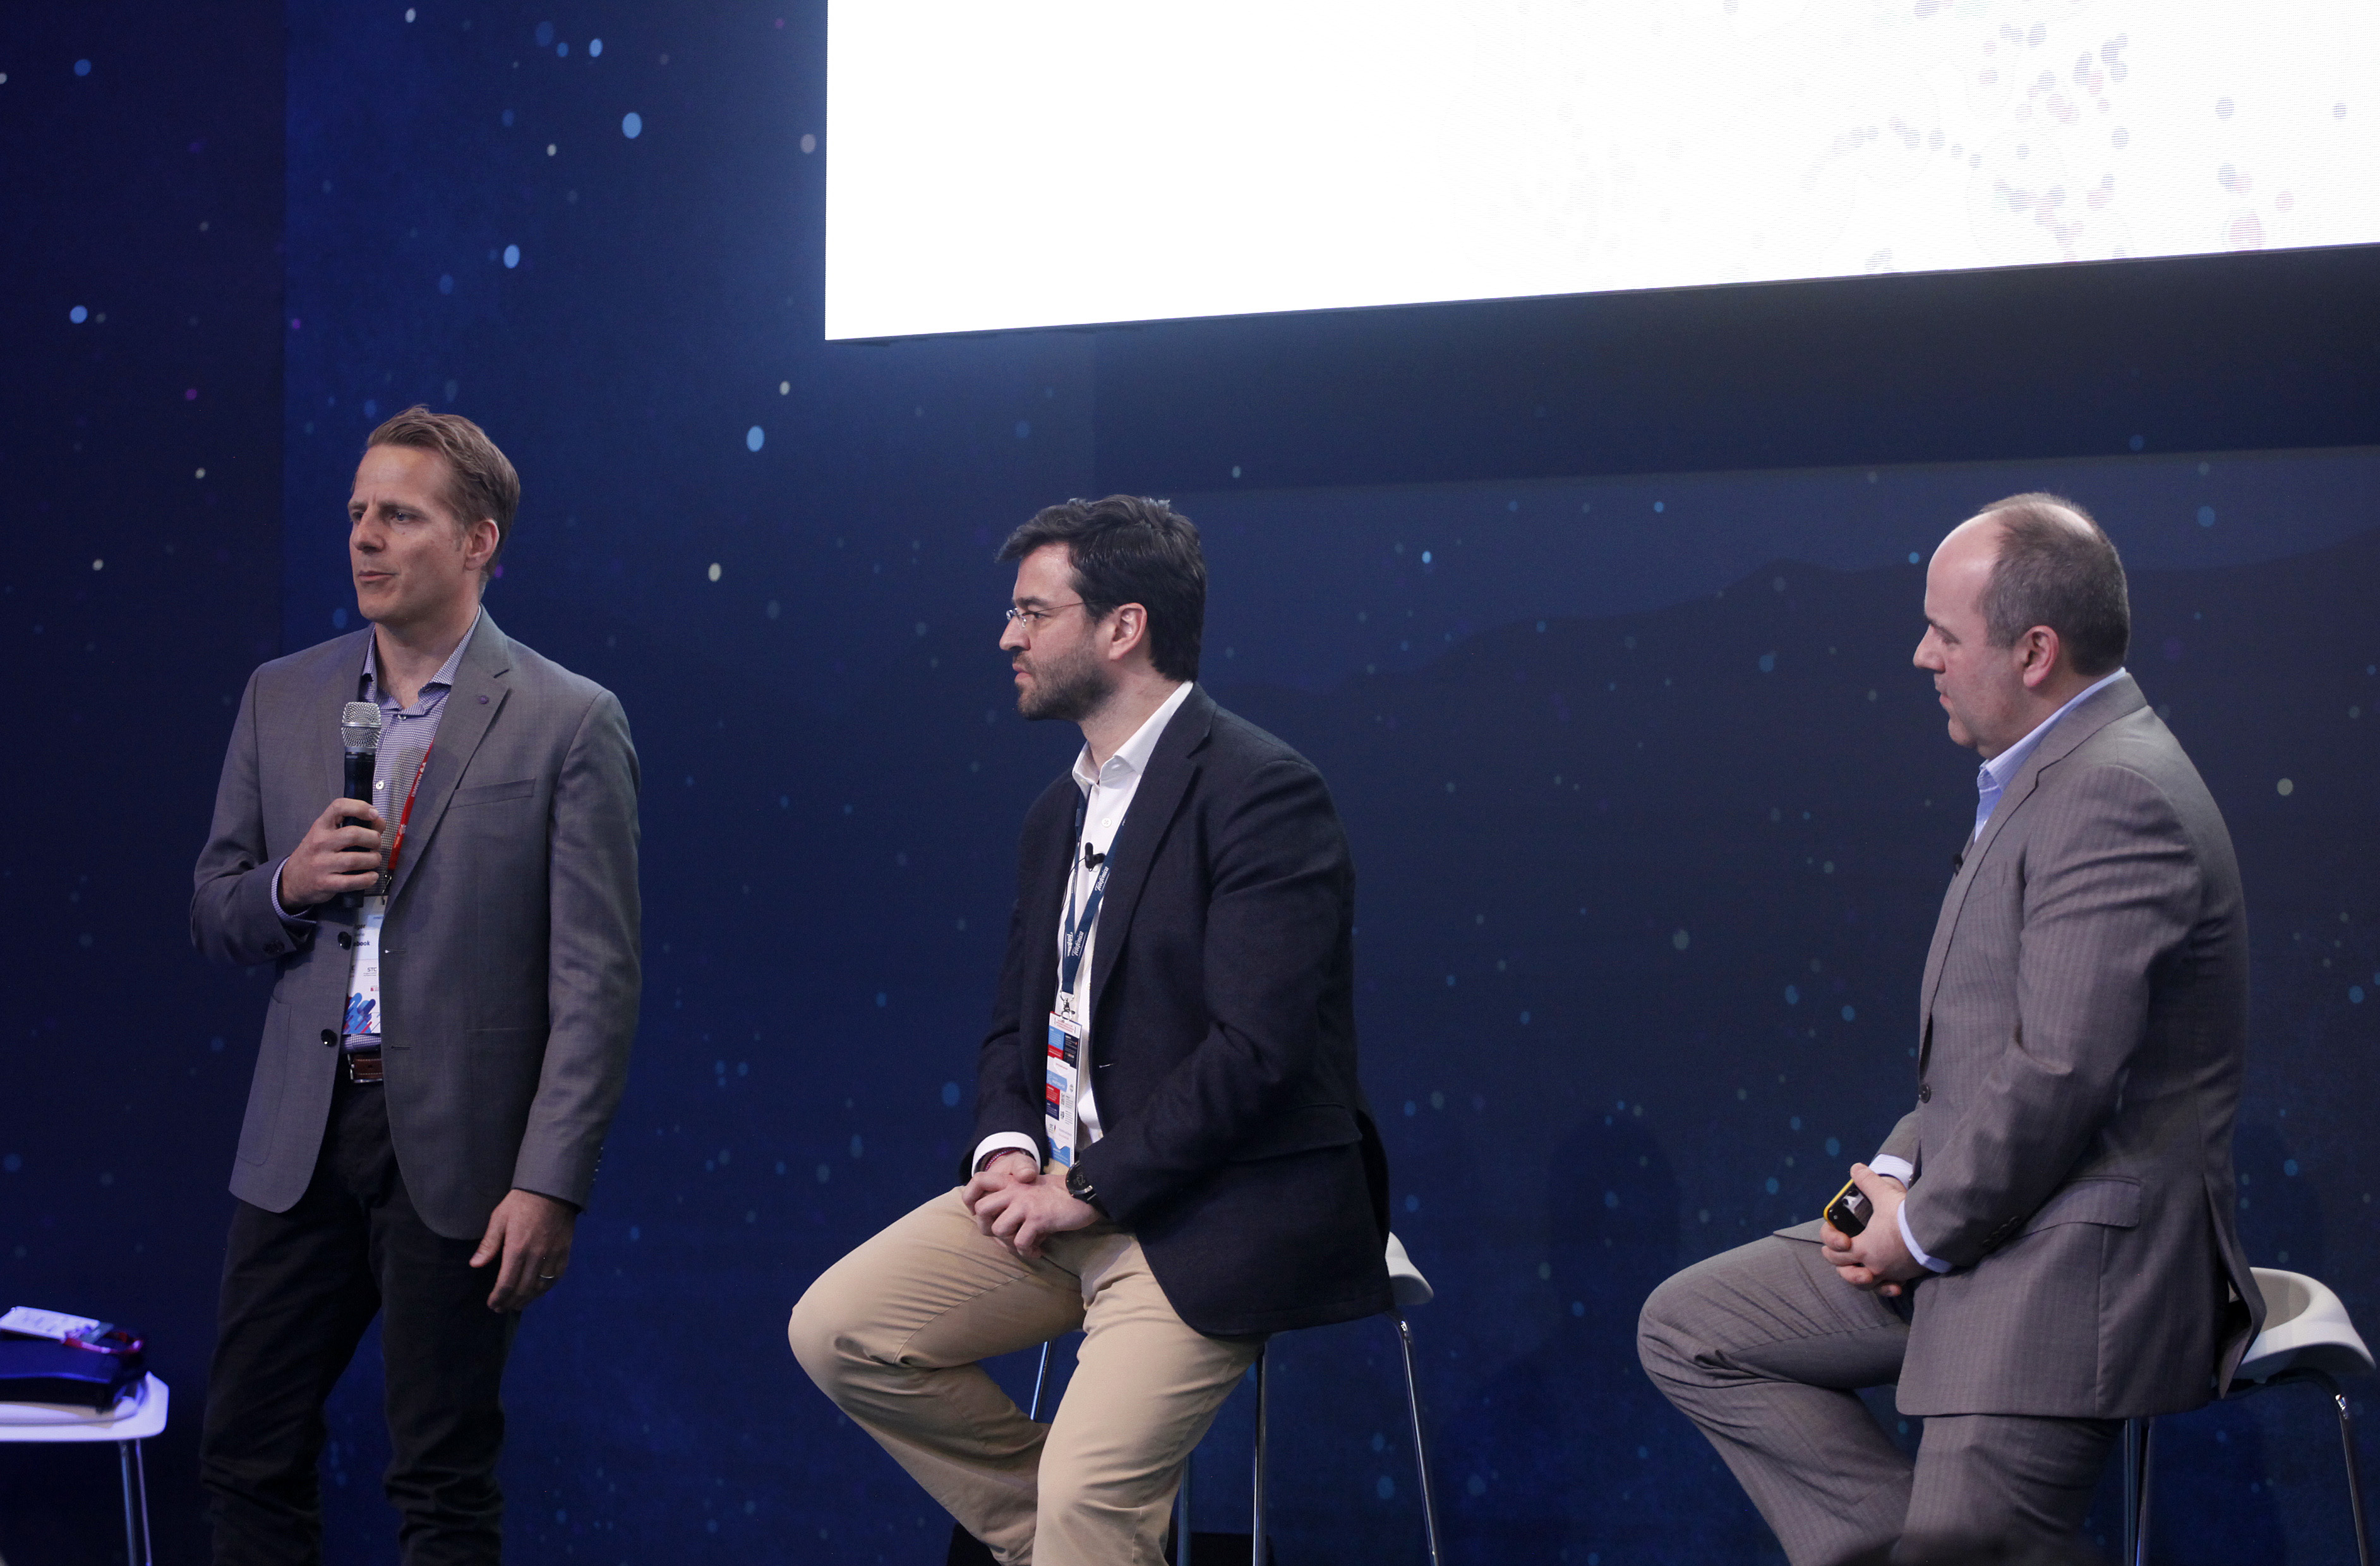 From left to right: Roger Greene, Facebook; Gonzalo Martín-Villa, Telefónica Chief Innovation Officer and Patrick López, director of customer centric networks, Telefónica